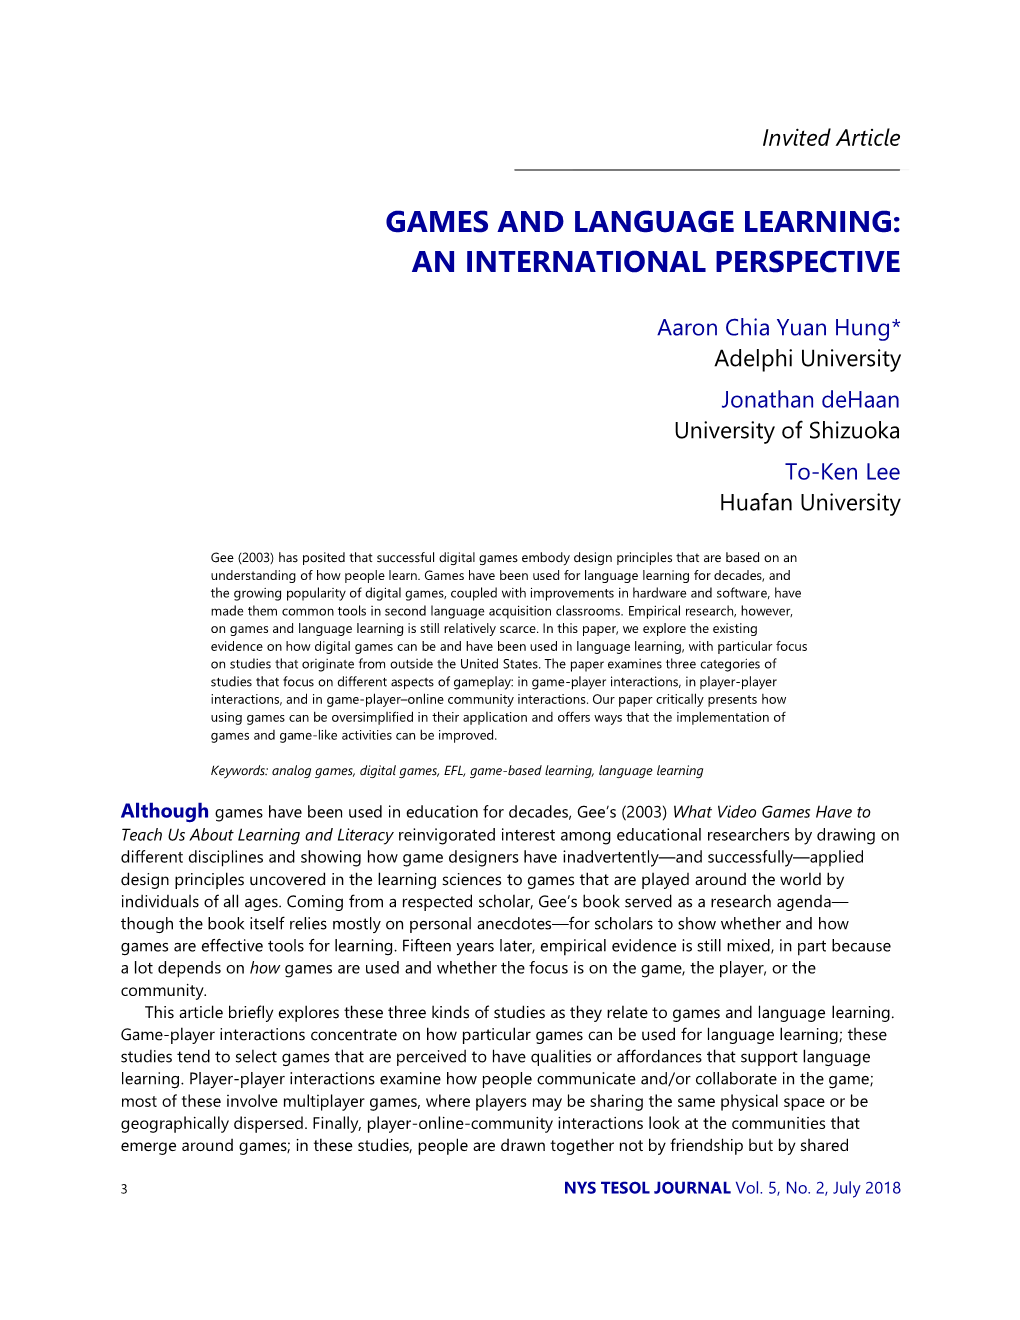 Games and Language Learning: an International Perspective